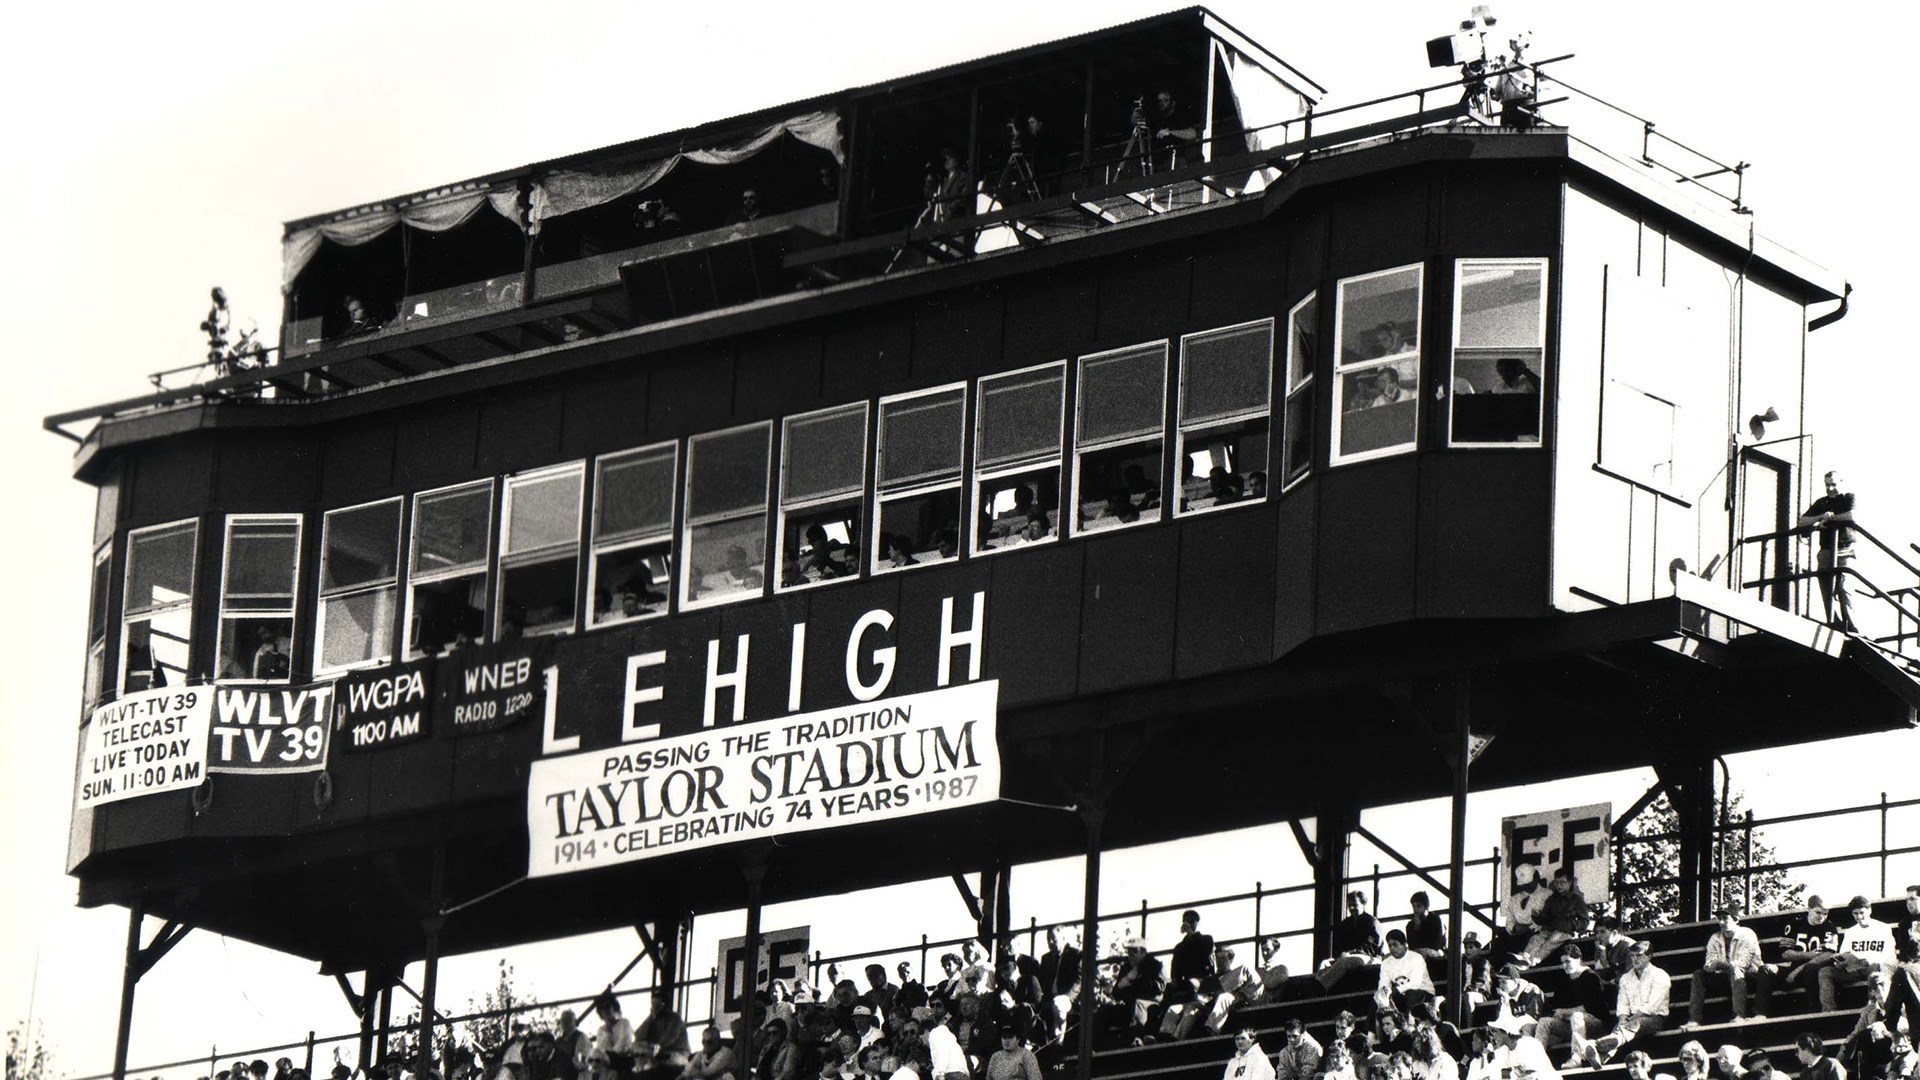 The booth at Taylor Stadium in 1987